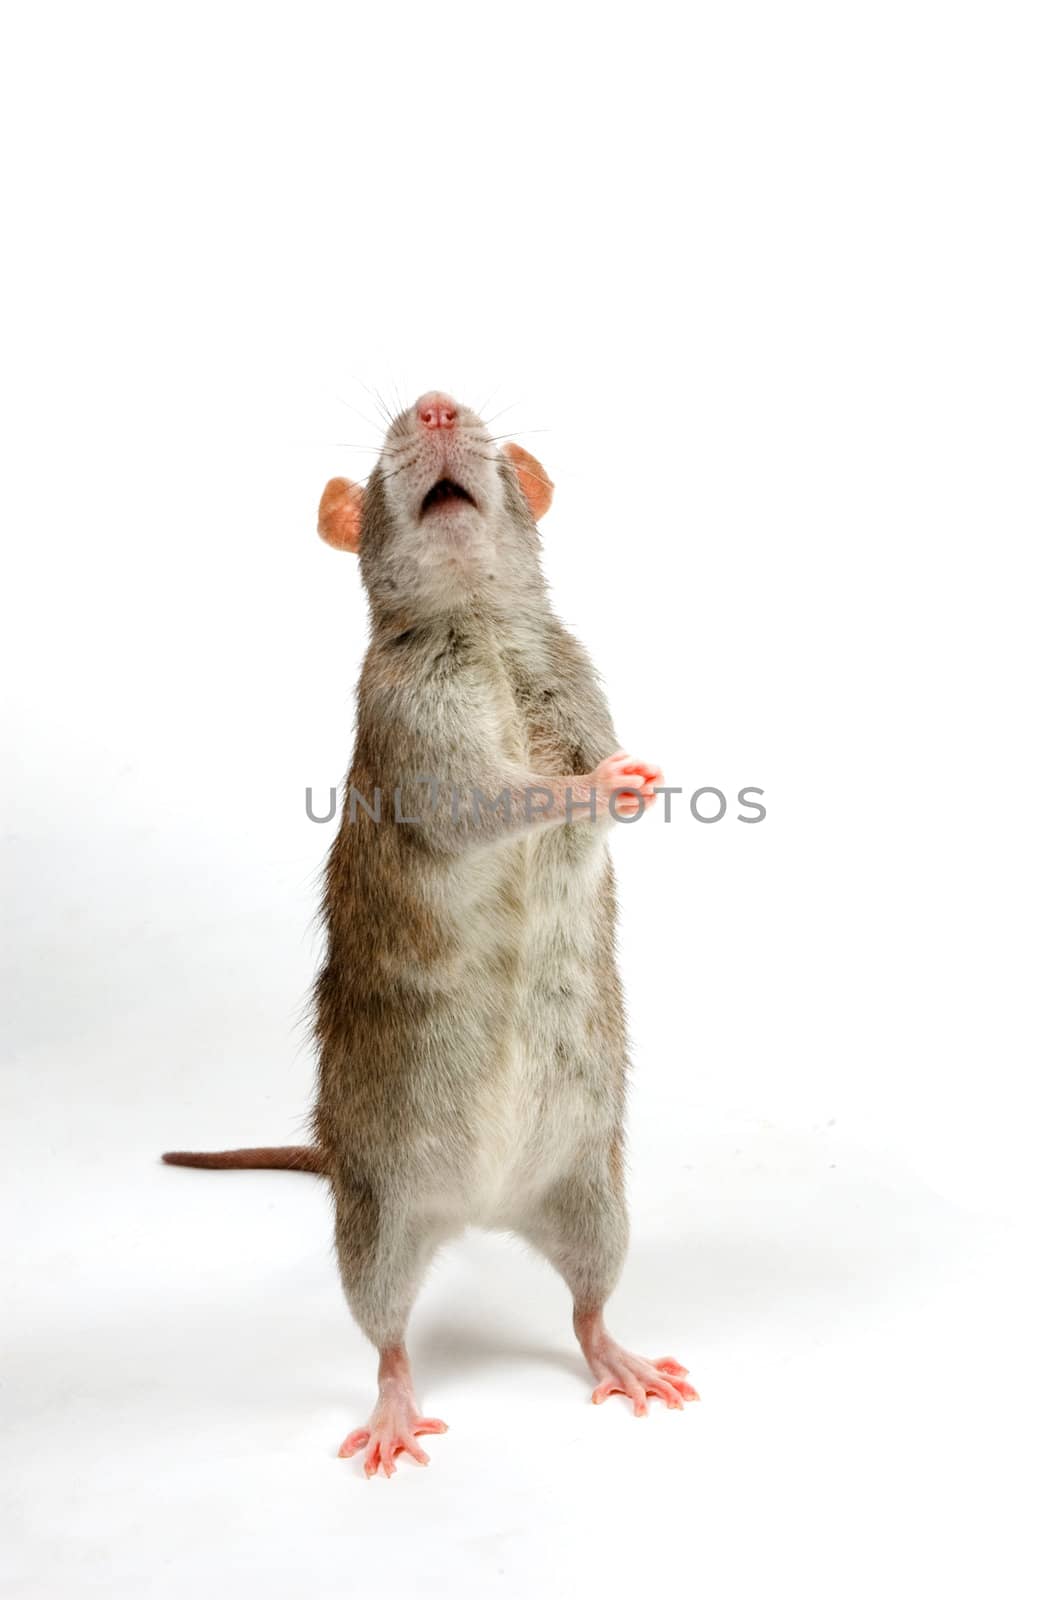 brown rat is begging in front of a white background